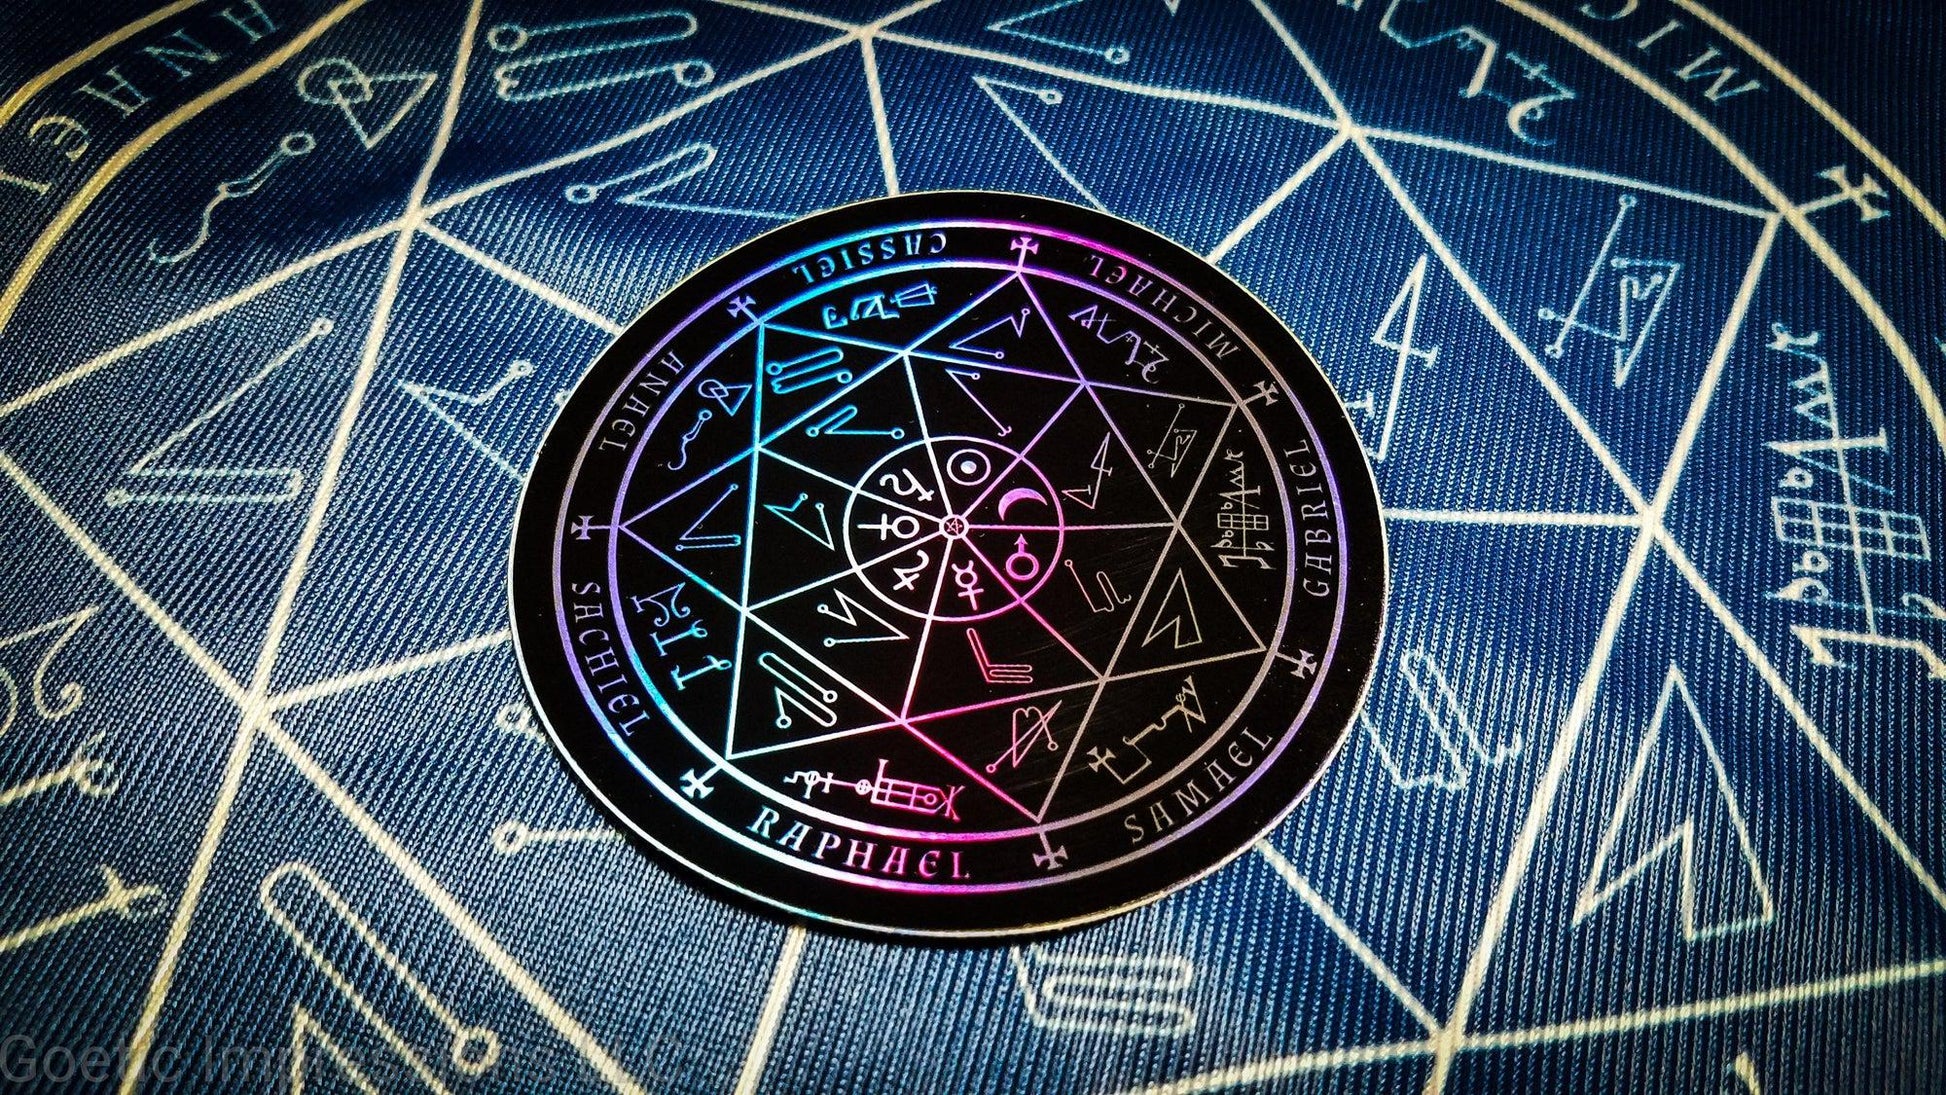 Planetary angel holographic stickers.